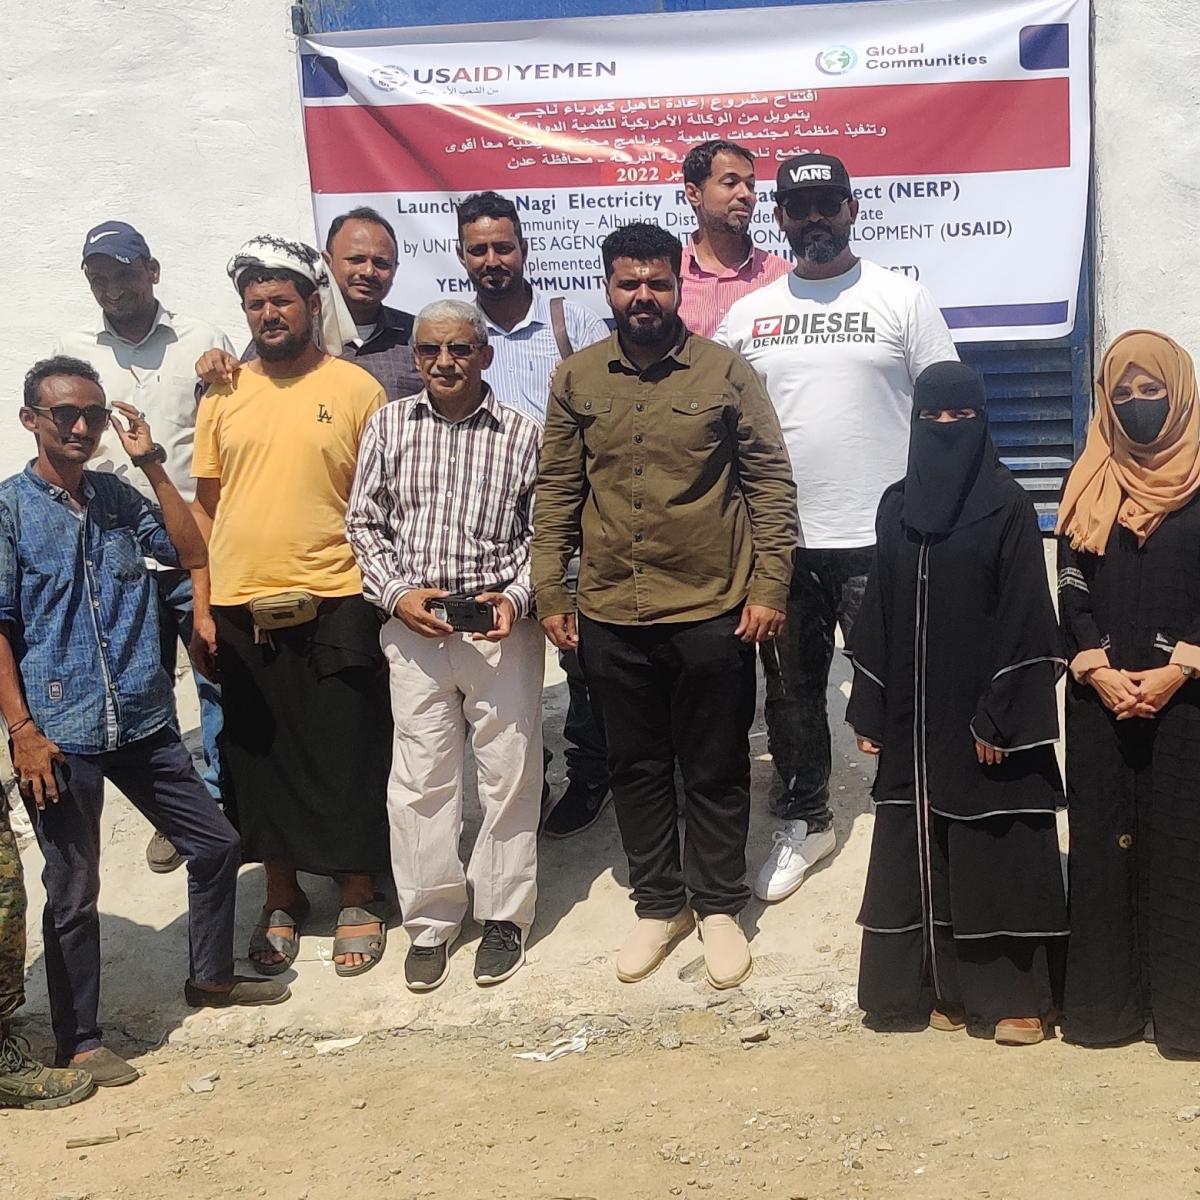 Yemenis are accessing reliable electricity after community members and a local power utility company collaborated under an activity supported by USAID.